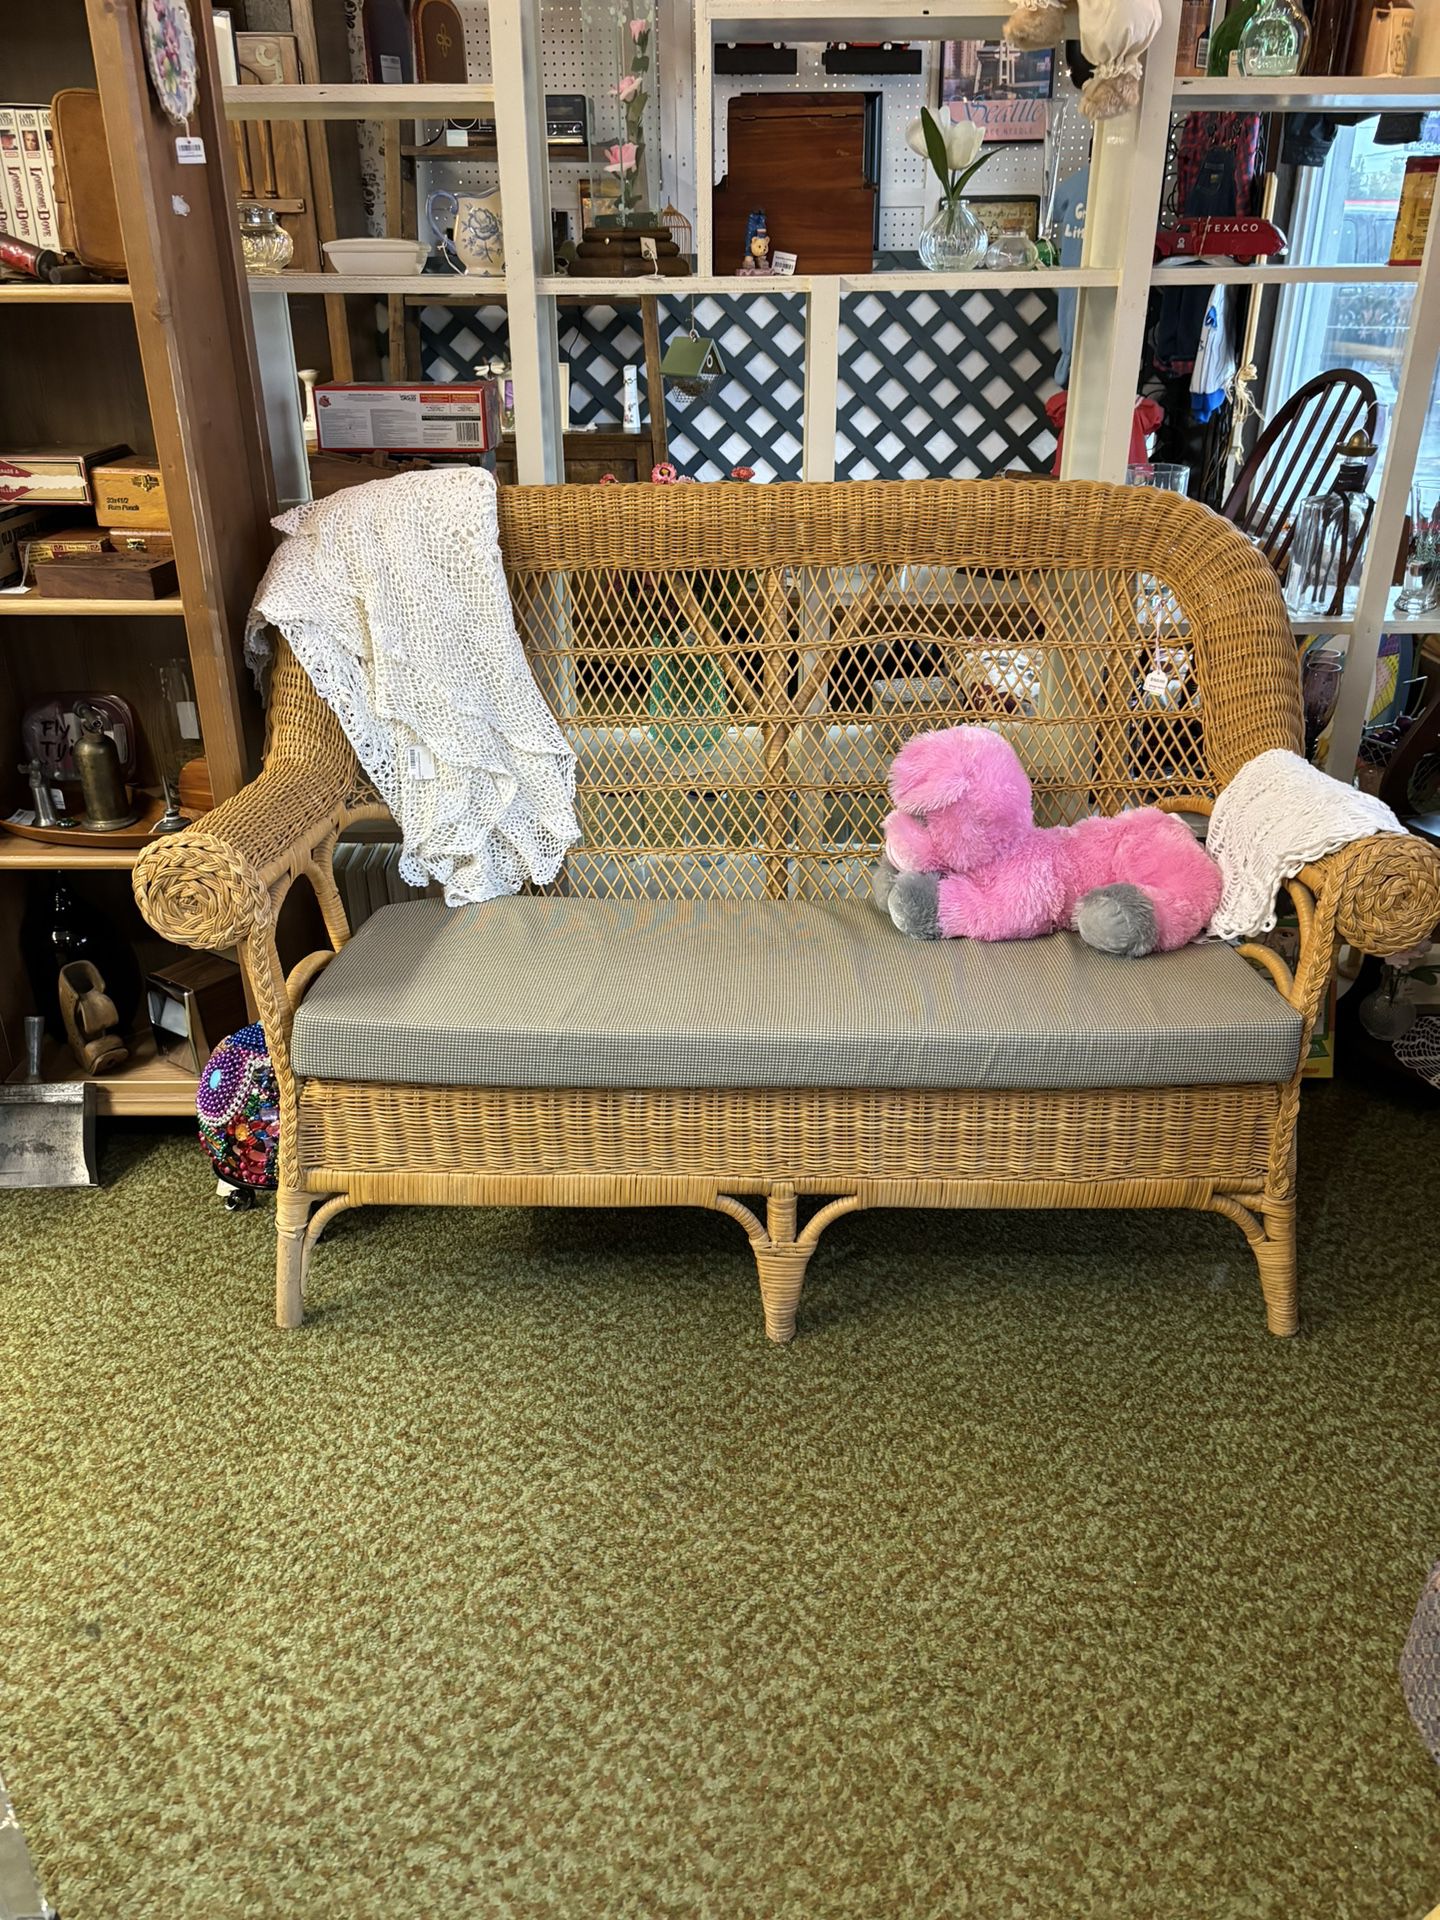 Booth Reset Wicker-watermelon Dishes-rocking Chairs, Bookcases, Vintage Radios etc. Can Be Viewed At Pacific Antiques Mall In Tacoma-Space 423!!